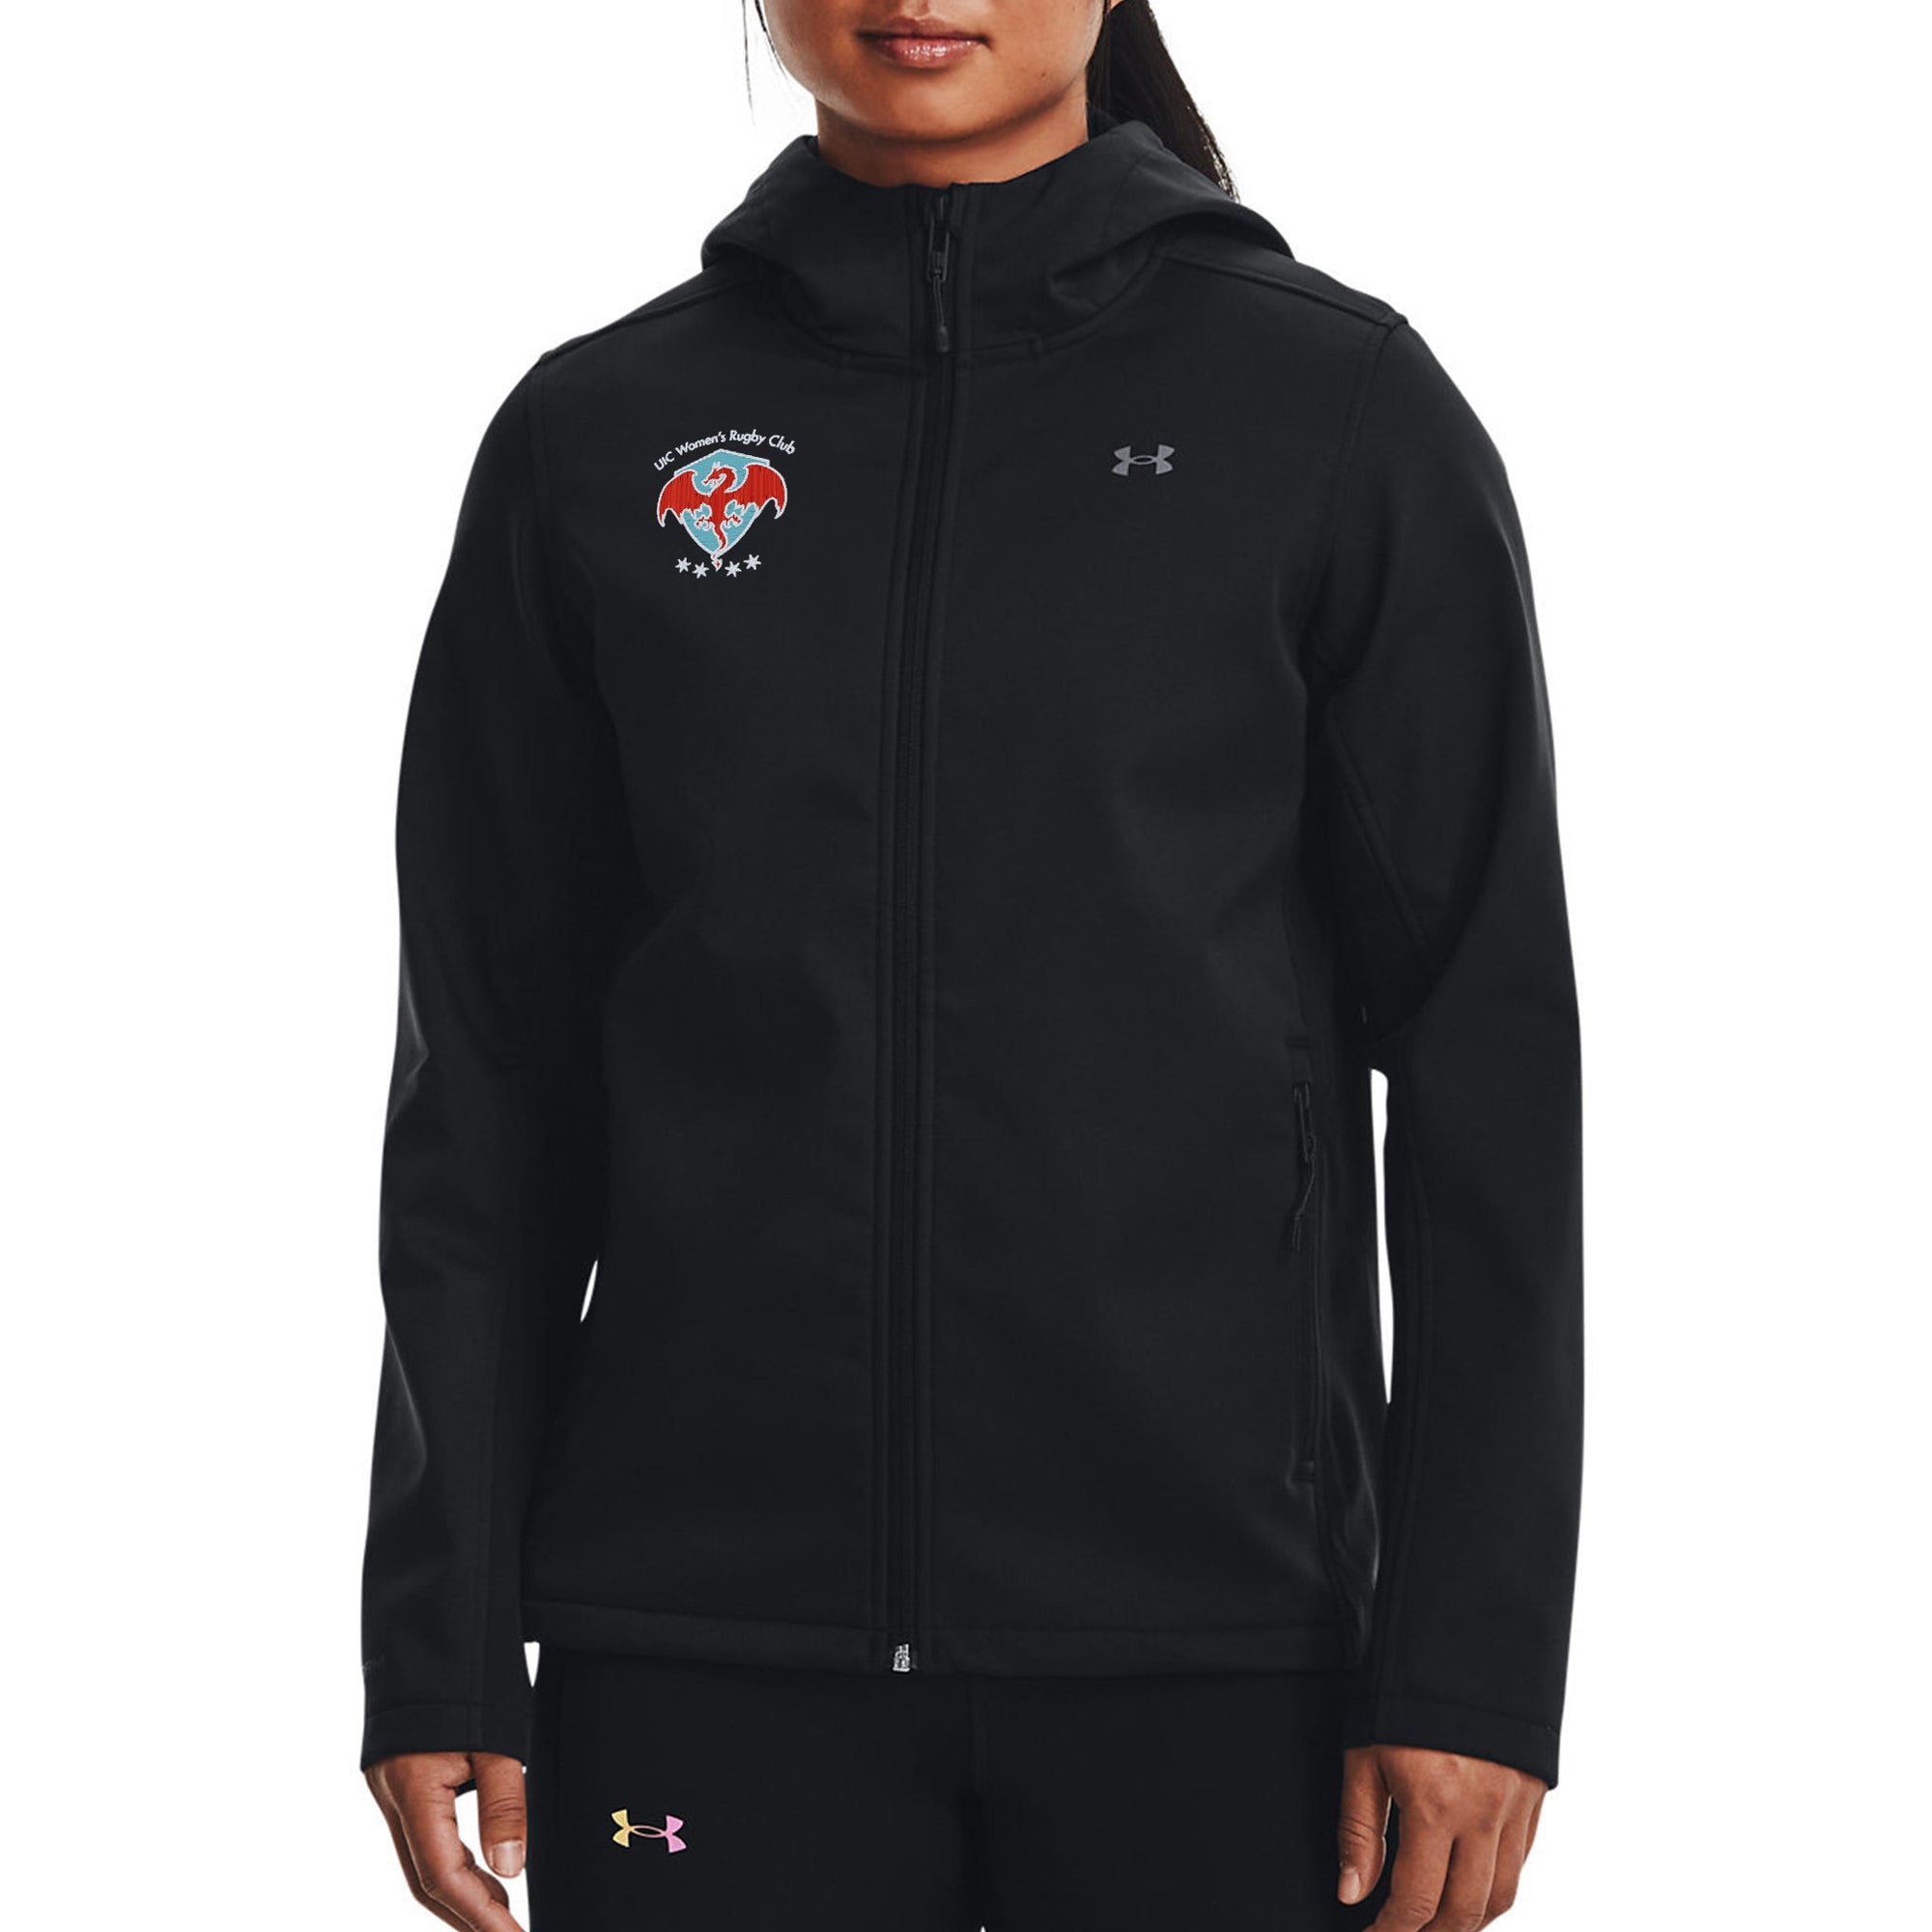 Rugby Imports UICWR Women's Coldgear Hooded Infrared Jacket